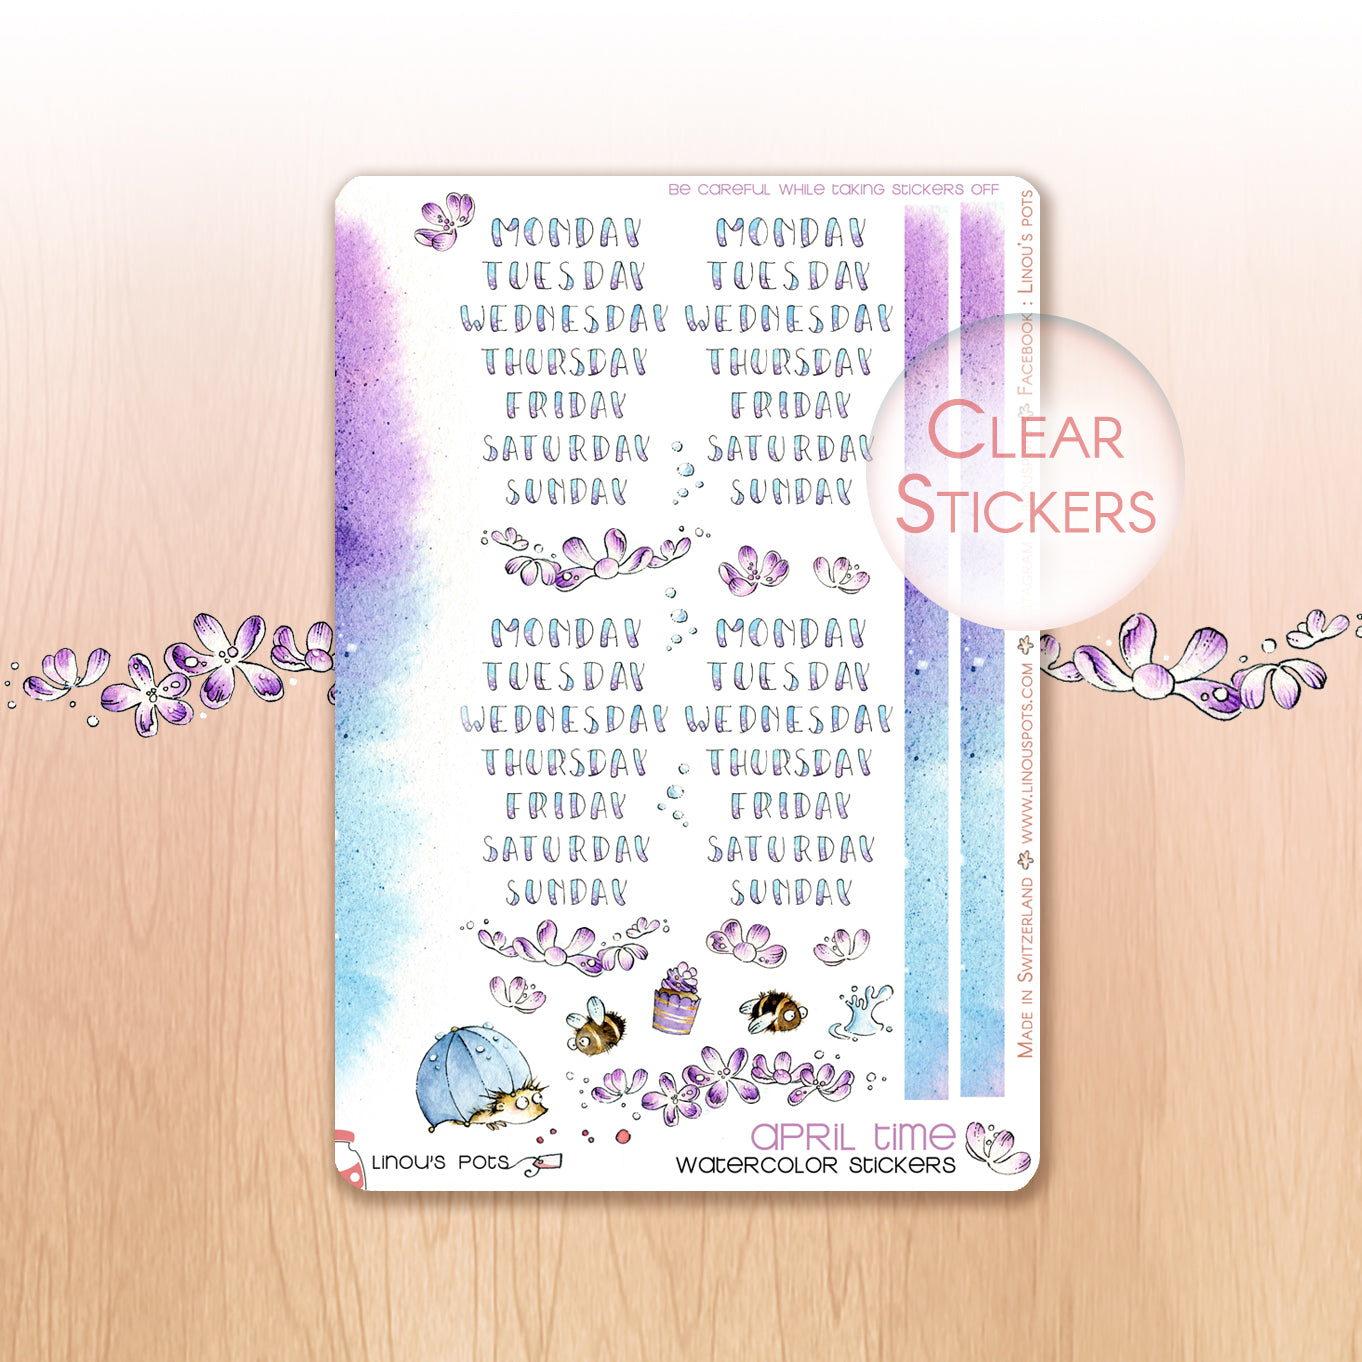 Buzzing In The Rain - Watercolor Planner stickers - Weekly Lettered Headers